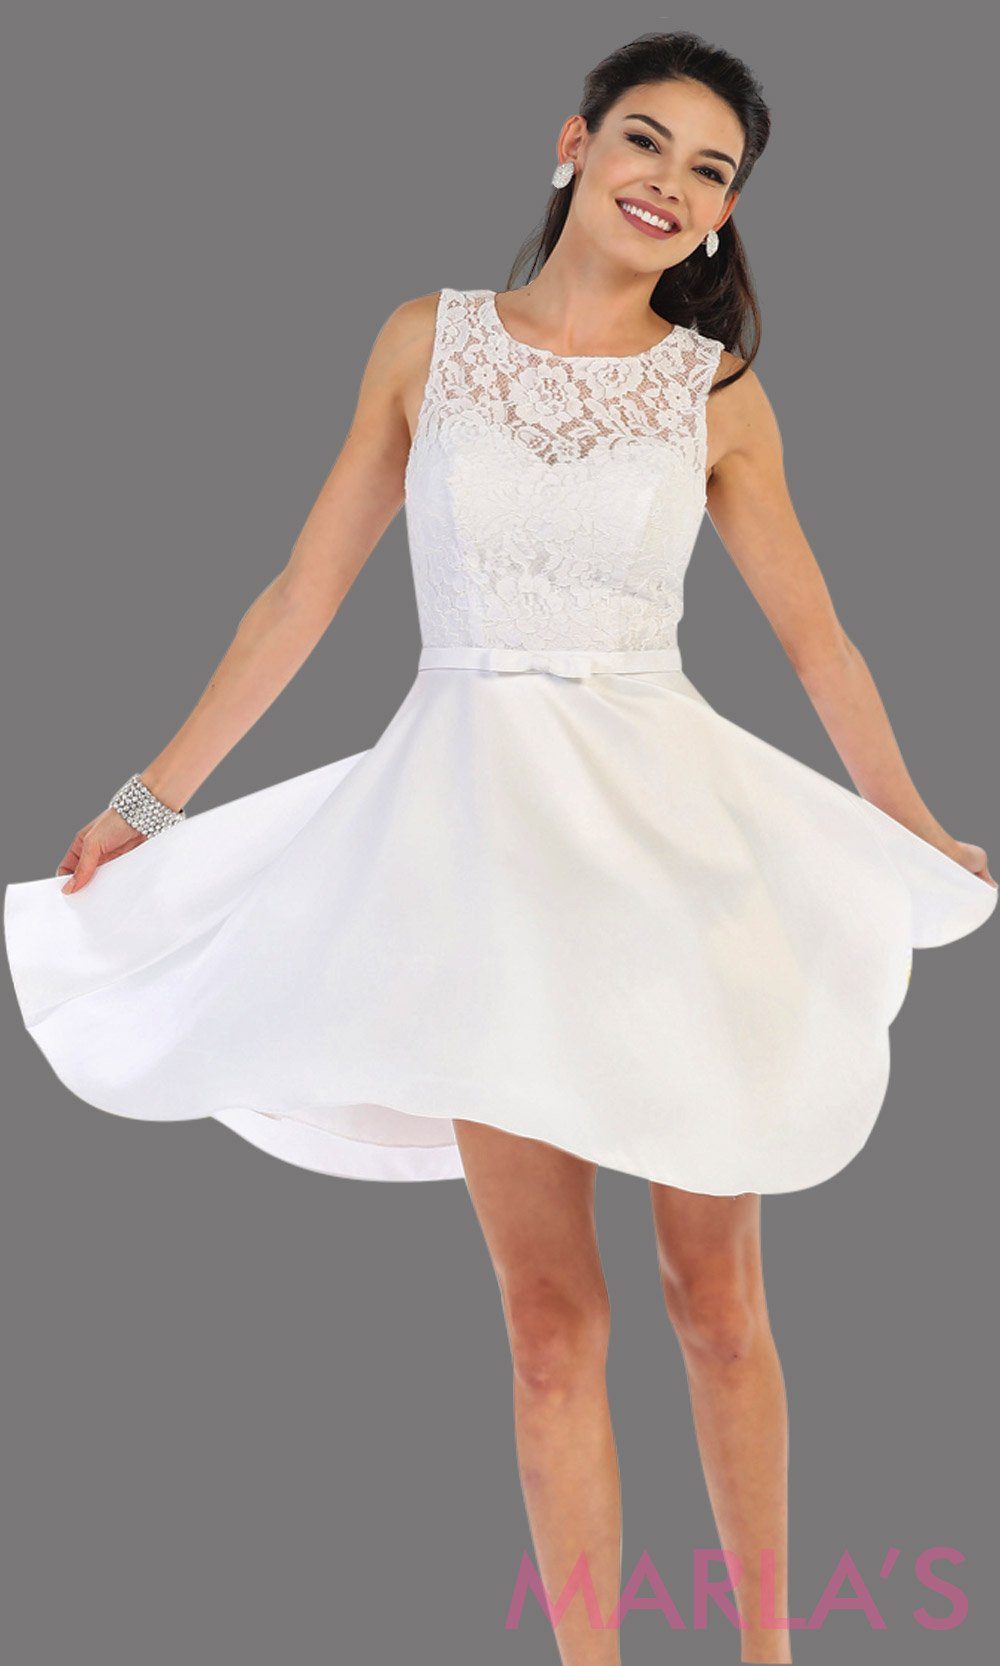 Short simple  semi formal white dress with lace bodice and satin skirt. White dress is perfect for grade 8 grad, graduation, short prom, damas quinceanera, confirmation. Available in plus sizes.grade 8 grad dresses, graduation dresses